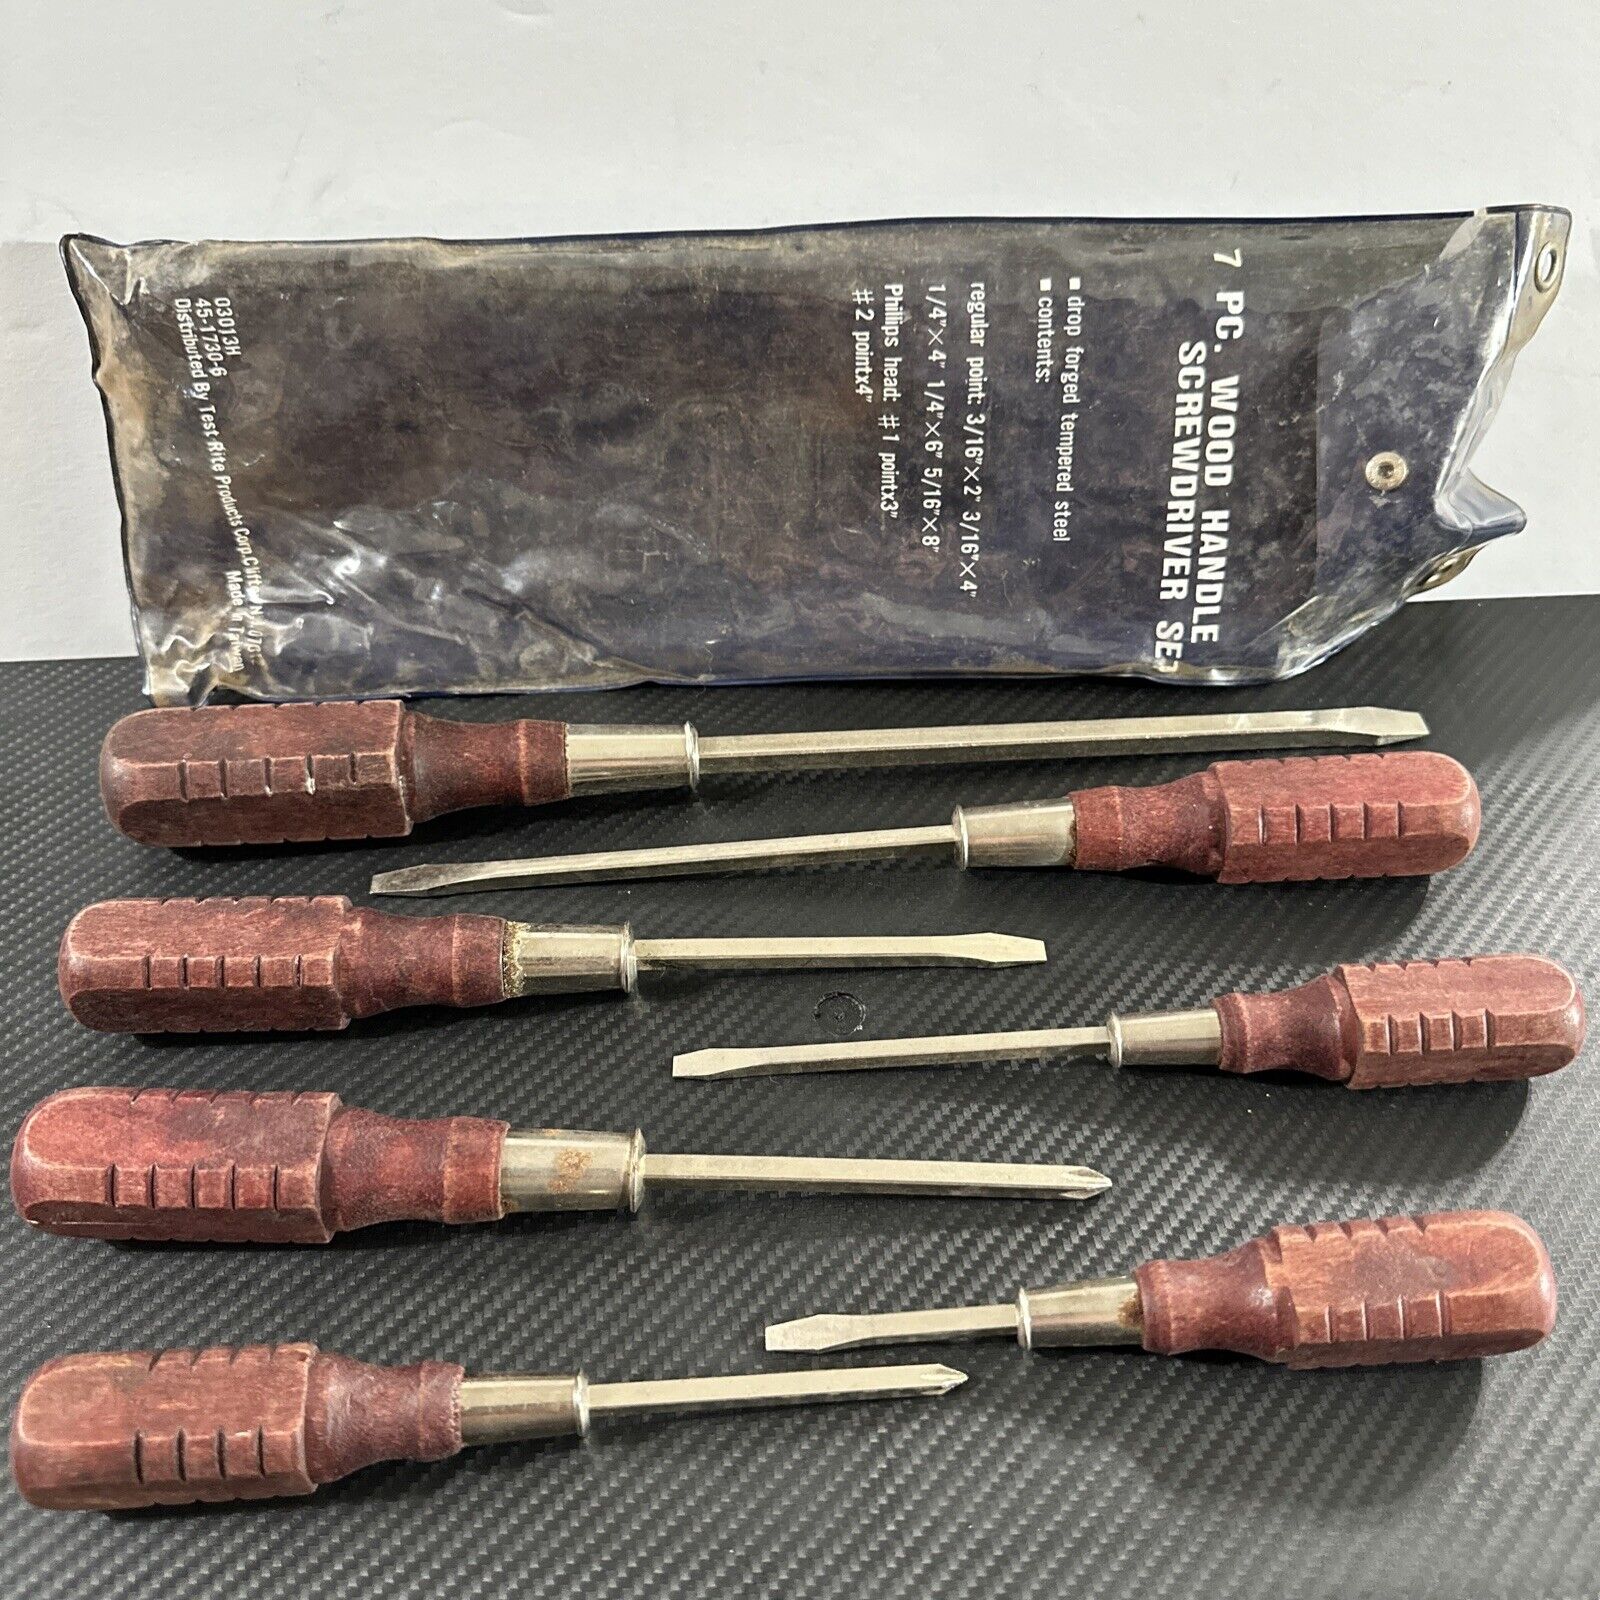 7 pc. wood handle screwdriver set Test Rite Products